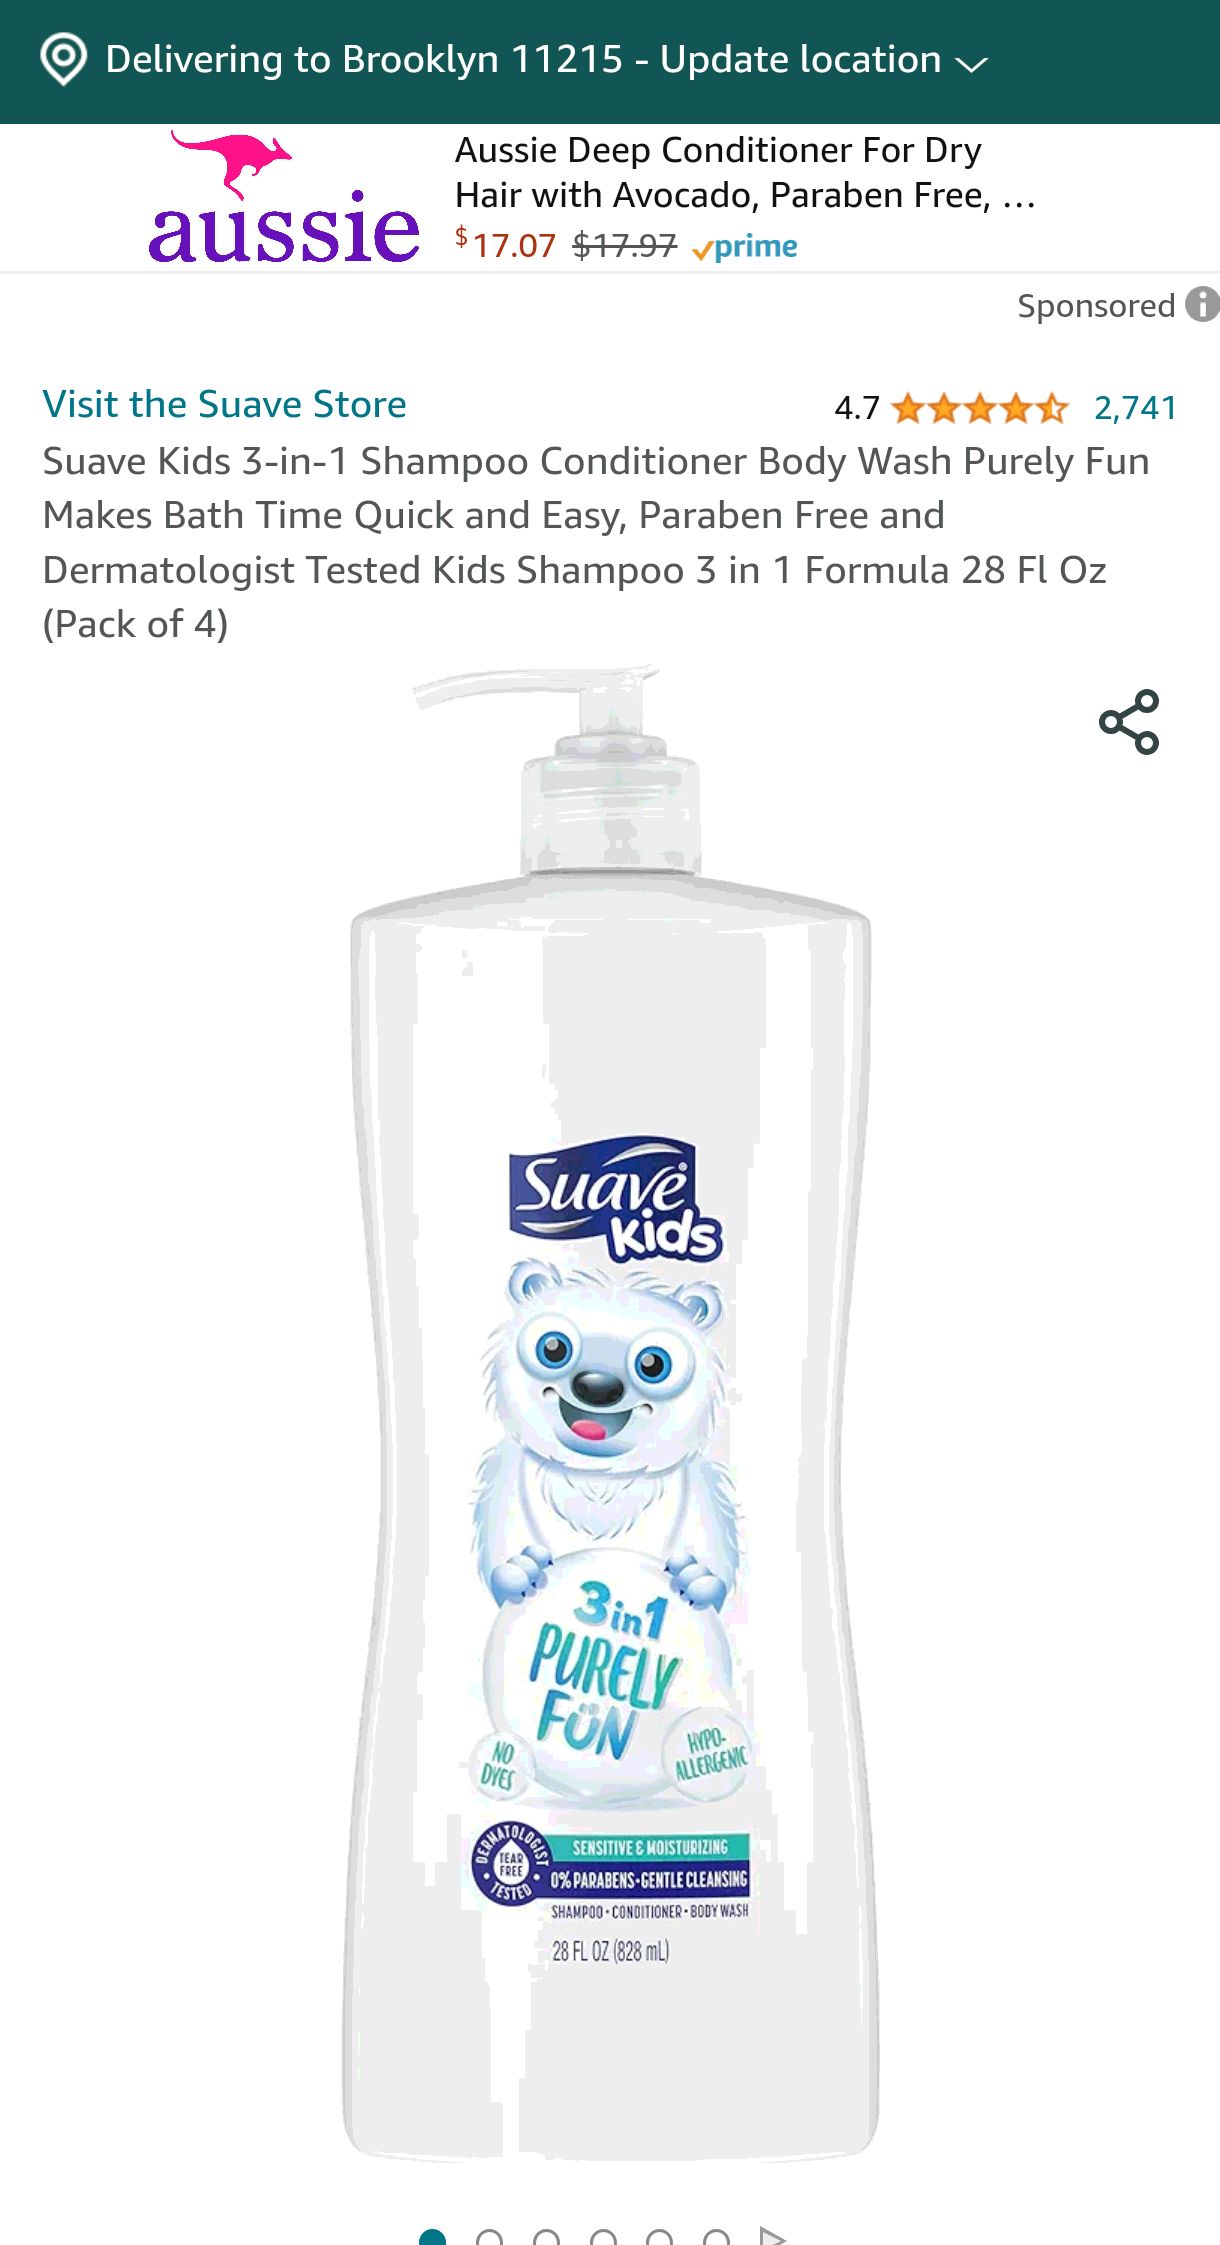 Amazon.com : Suave Kids 3-in-1 Shampoo Conditioner Body Wash Purely Fun Makes Bath Time Quick and Easy, Paraben Free and Dermatologist Tested Kids Shampoo 3 in 1 Formula 28 Fl Oz (Pack of 4) : Beauty 